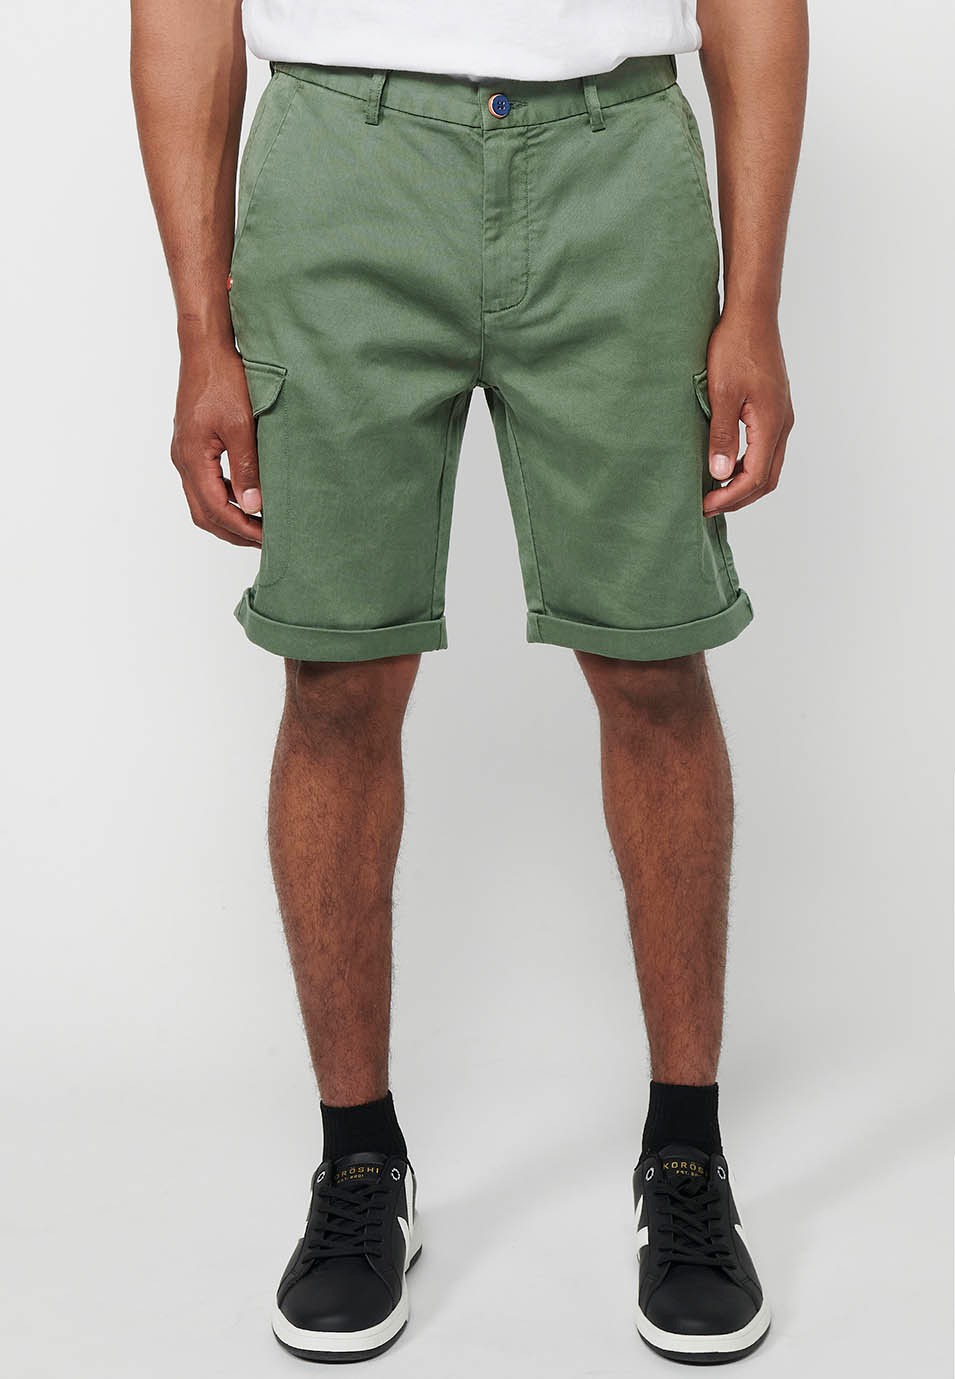 Shorts with rubberized waist and zipper and button closure with pockets, two sides with flap in Green for Men 1